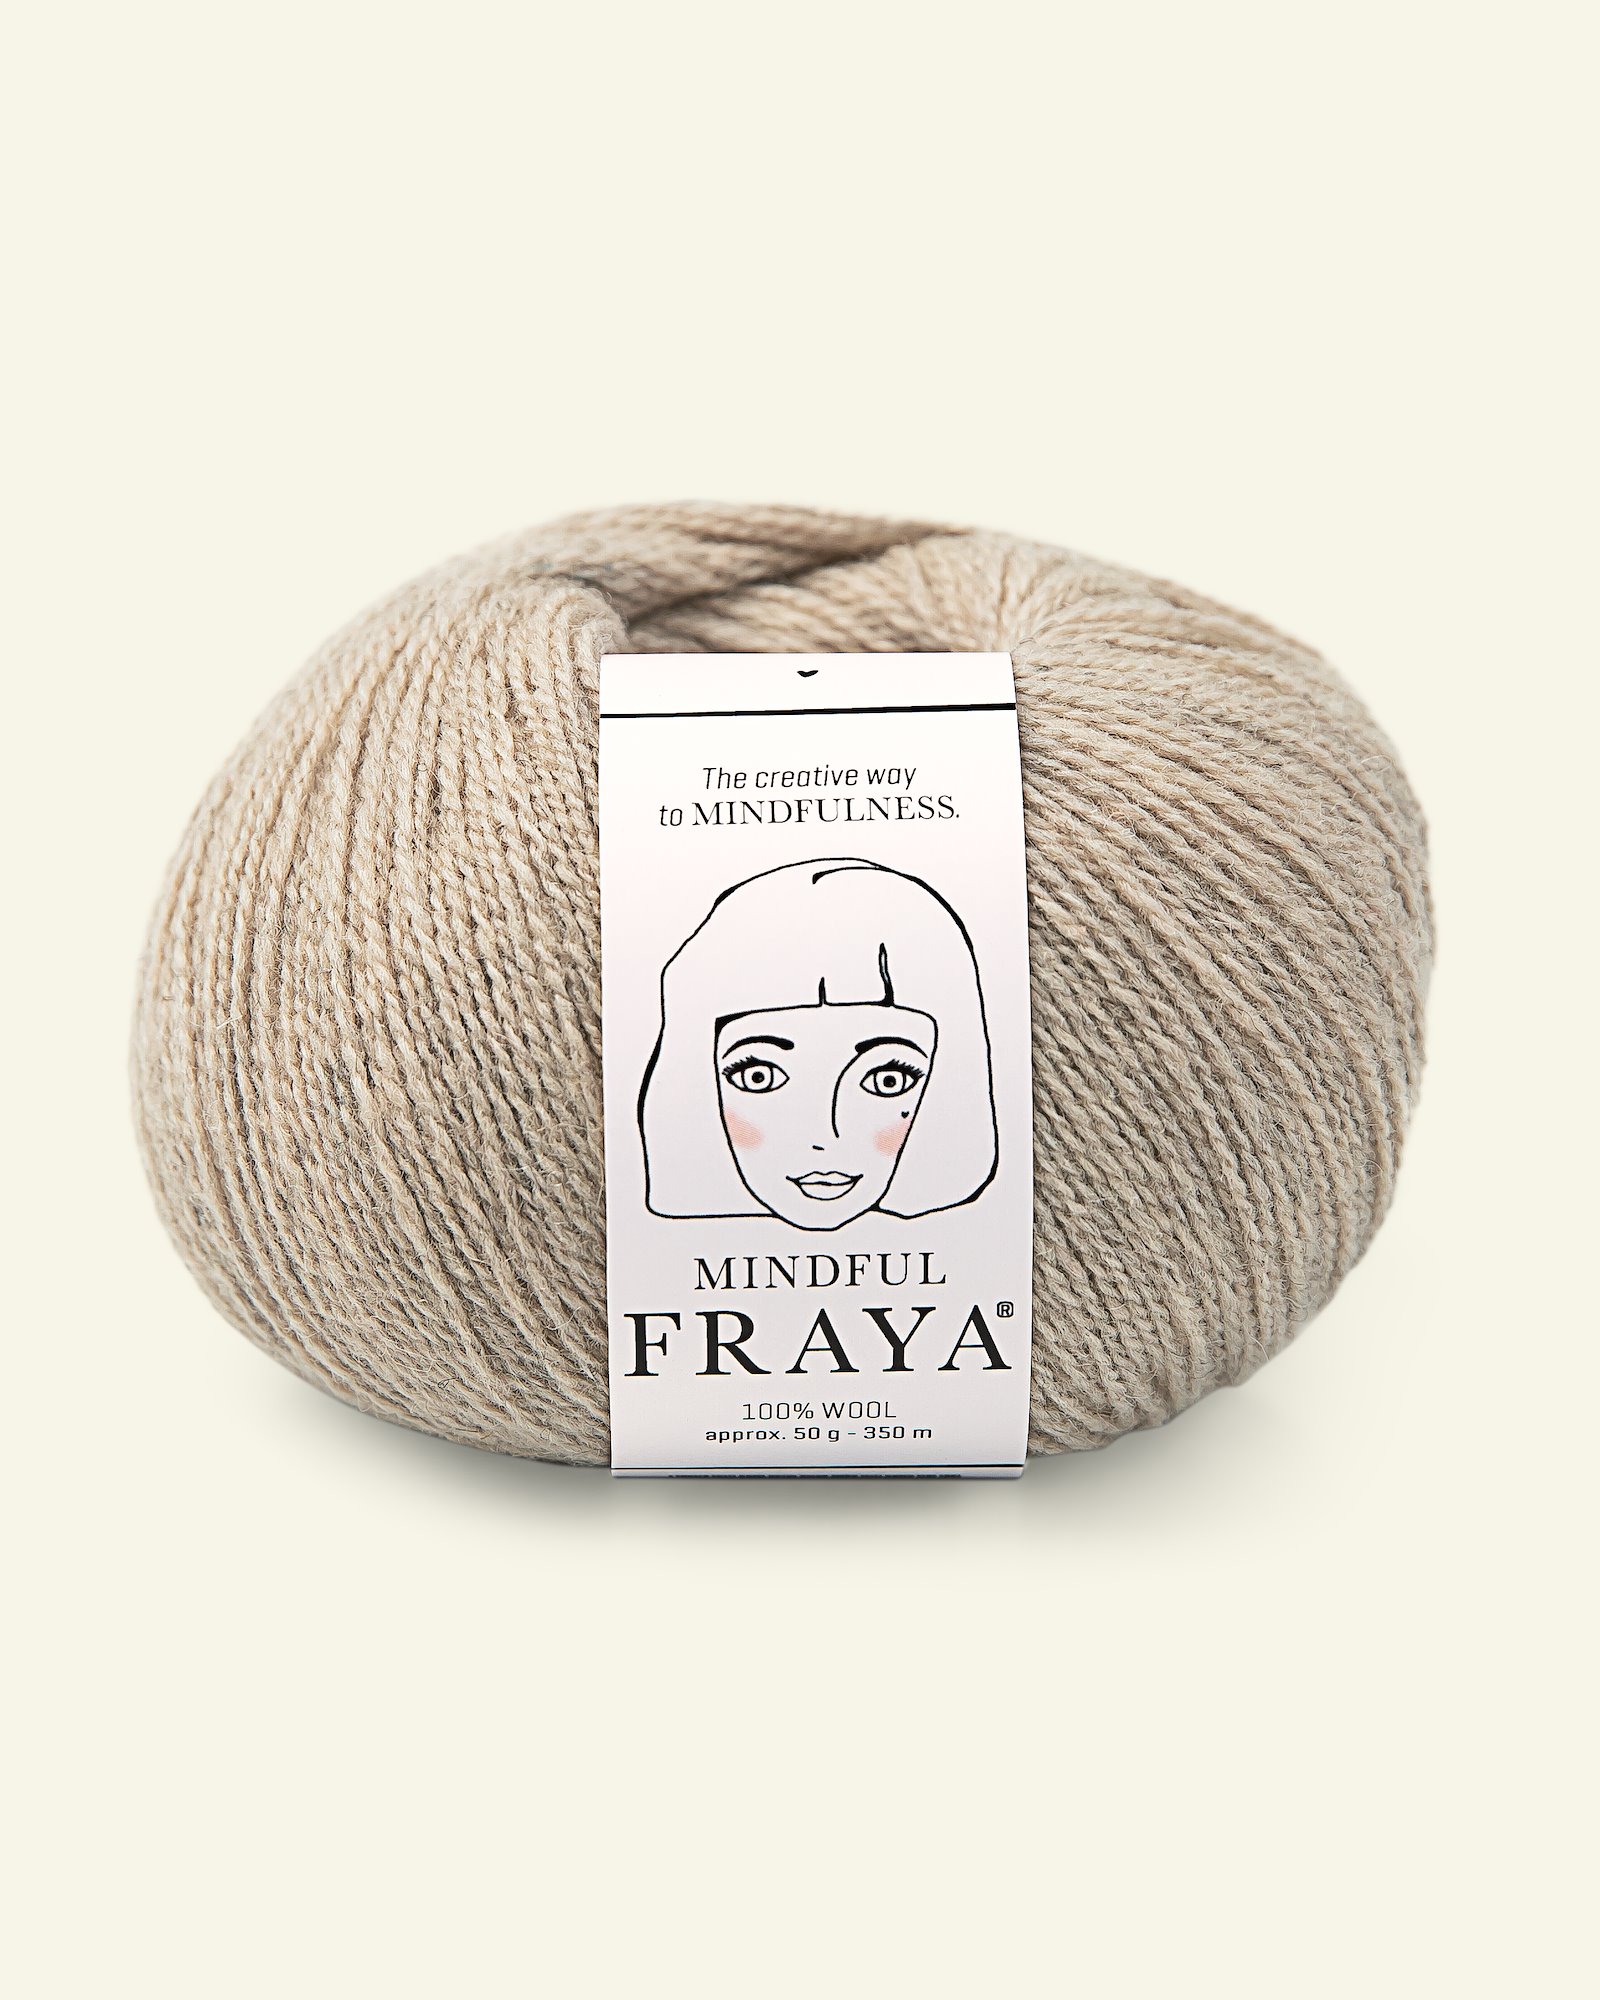 FRAYA, 100% Wolle "Mindful", Sand Meliert 90053338_pack